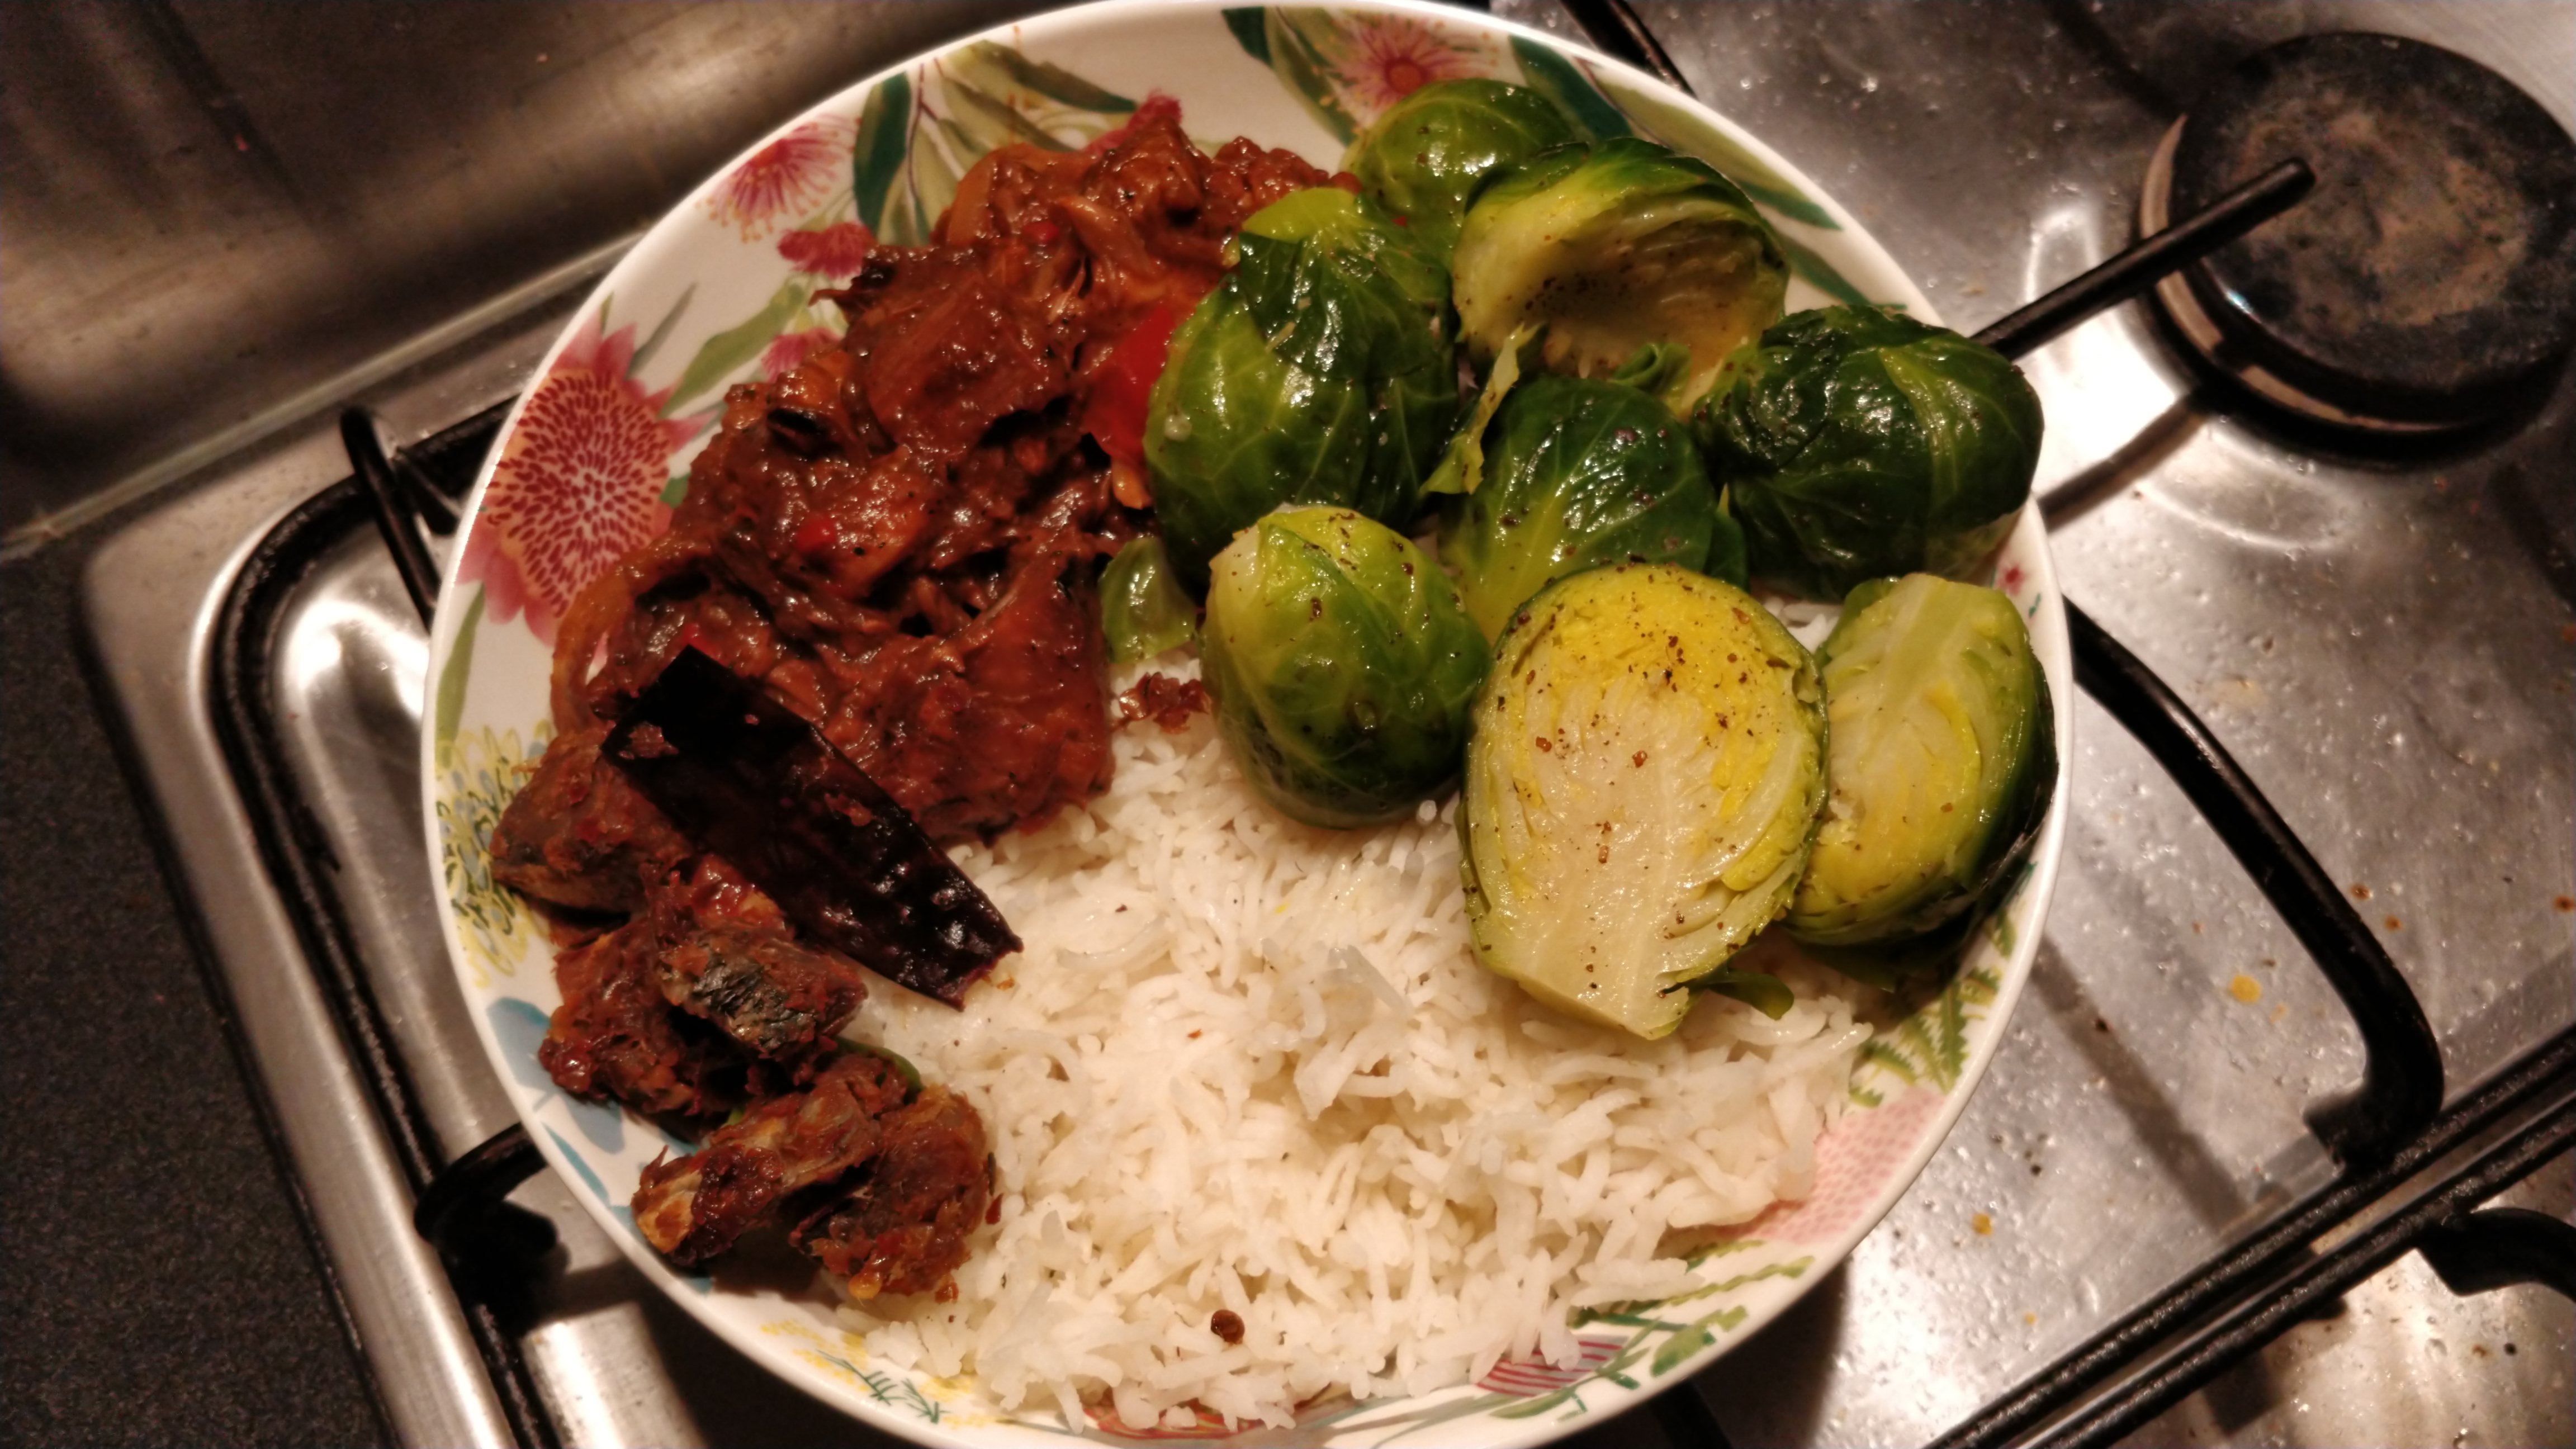 rice, jackfruit and Brussels sprouts served in a bowl with a small side of fried dry fish and dried chilli